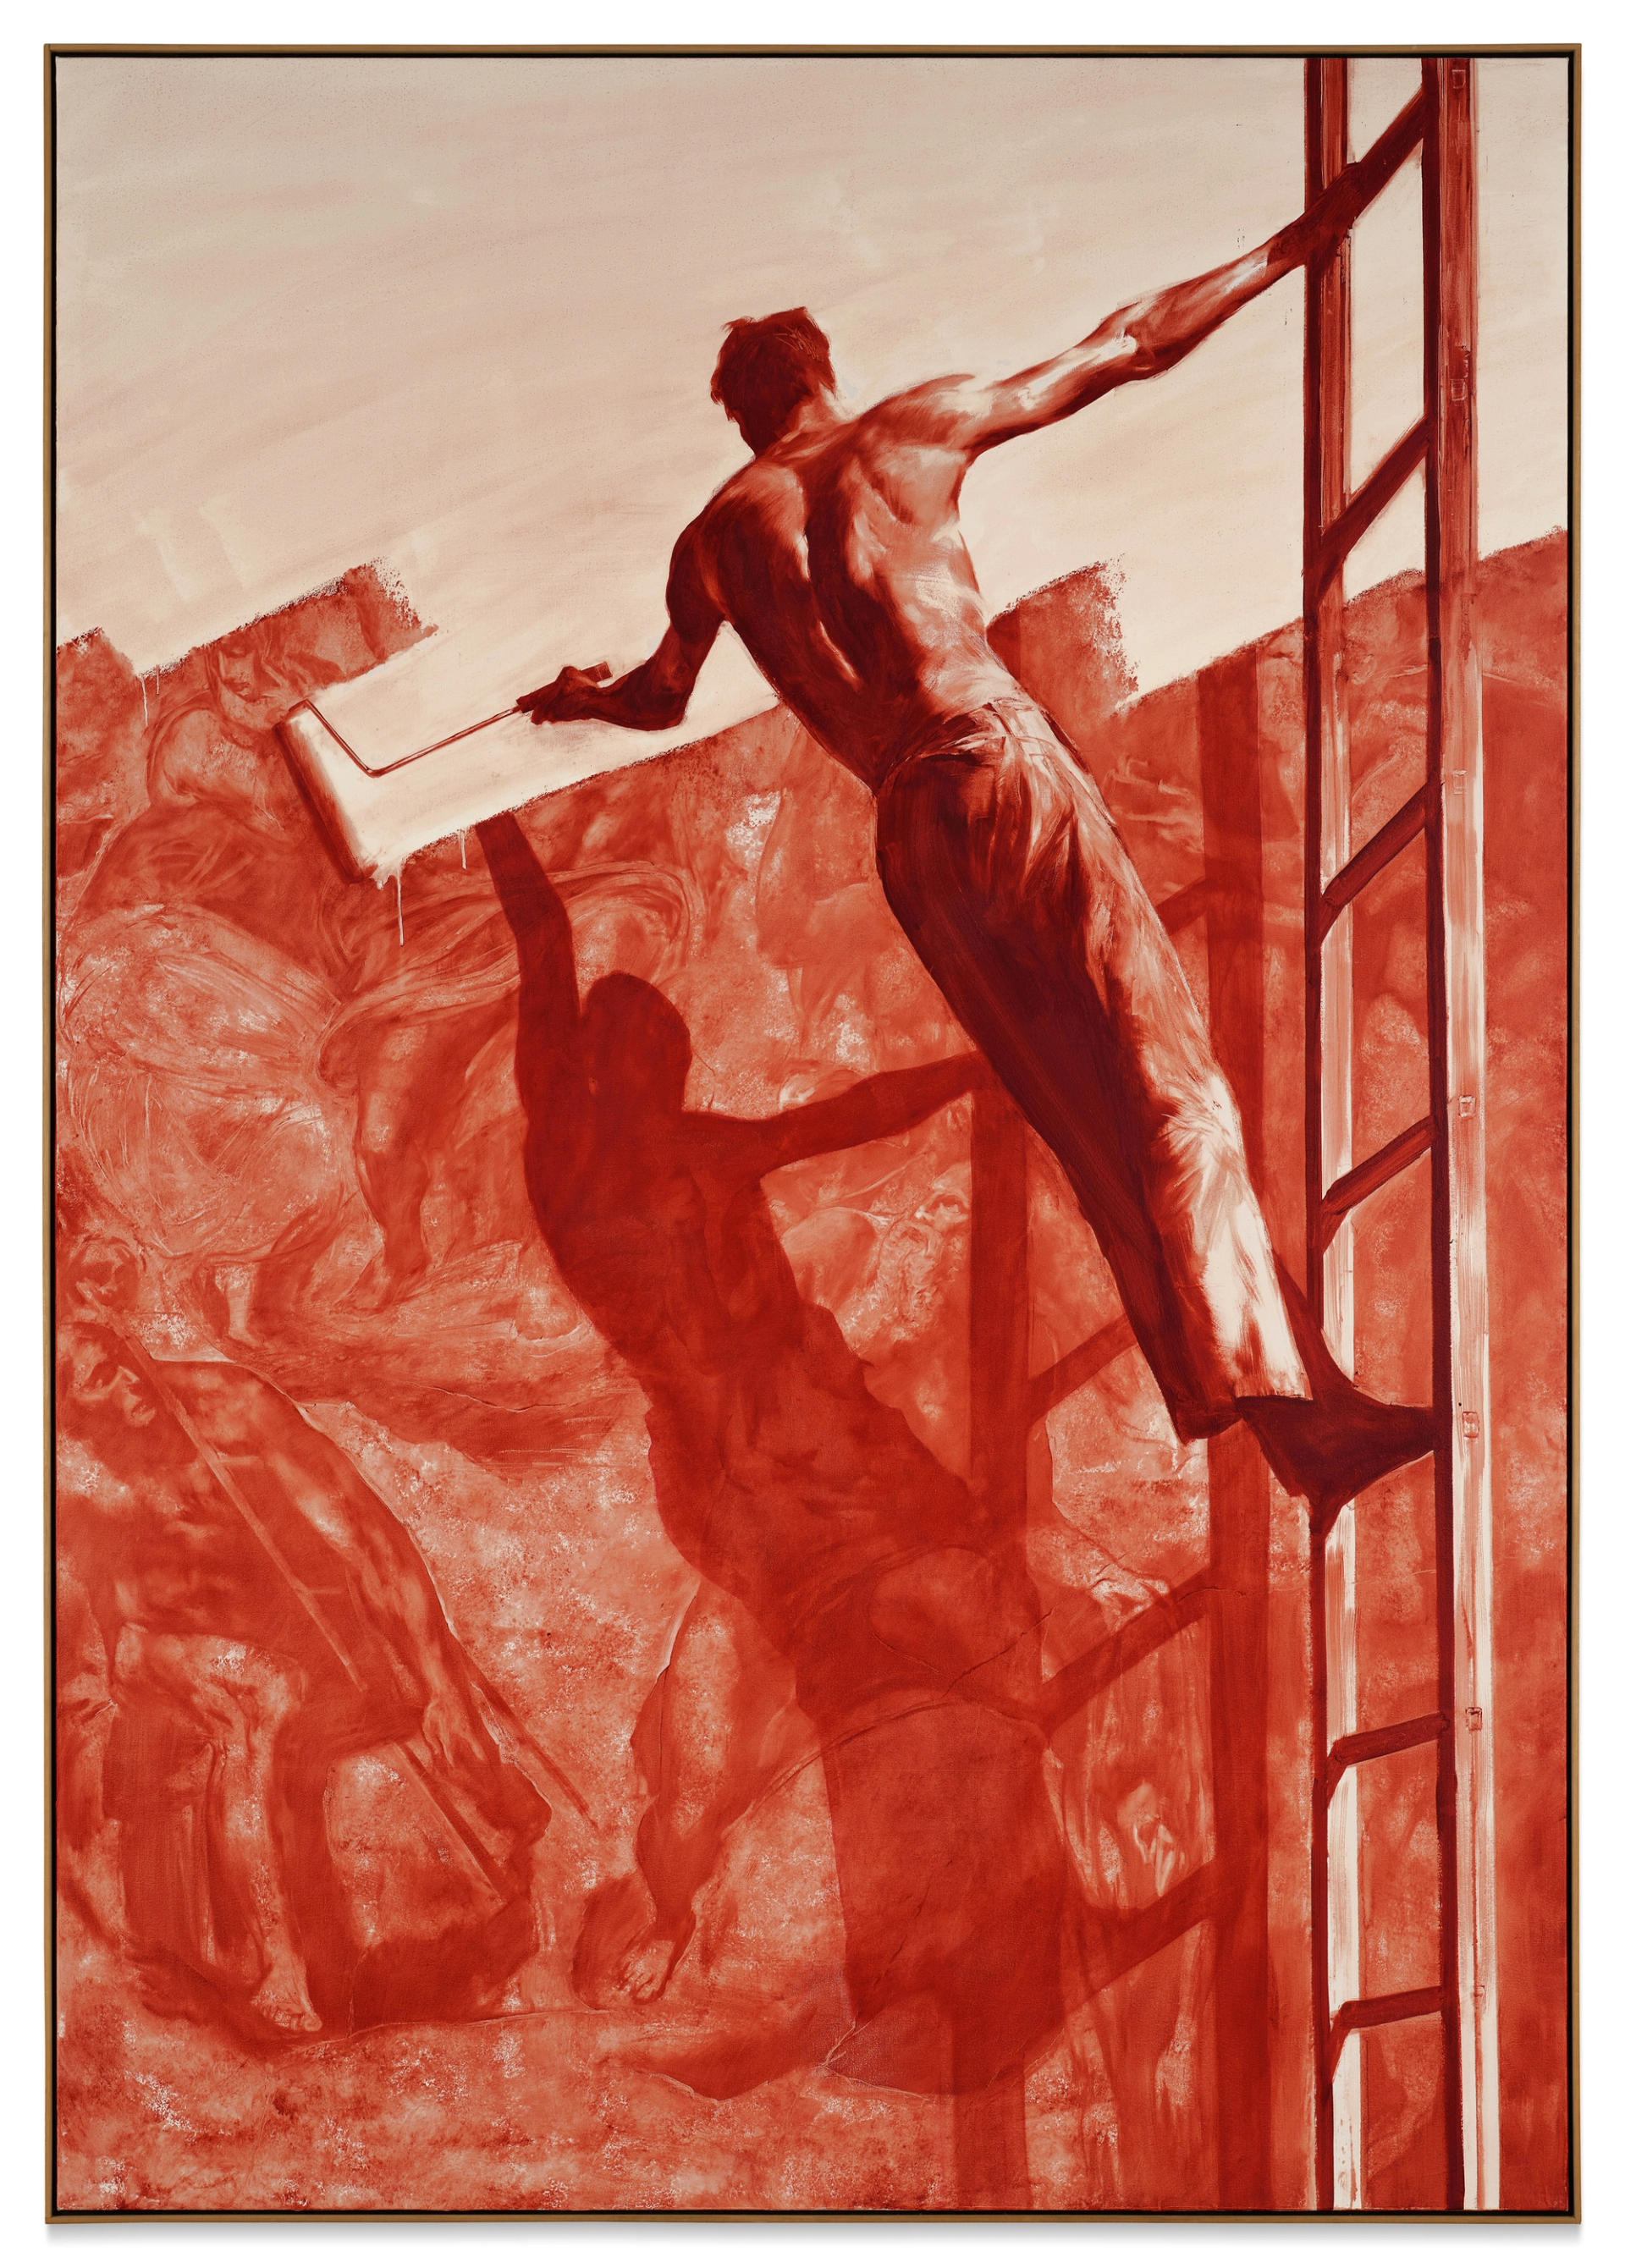 In this painting, a shirtless man can be seen dangling from a ladder as he paints over the figure of Jesus in Da Vinci's Last Supper. The work is composed of a white and red colour palette, with many variants in hue.